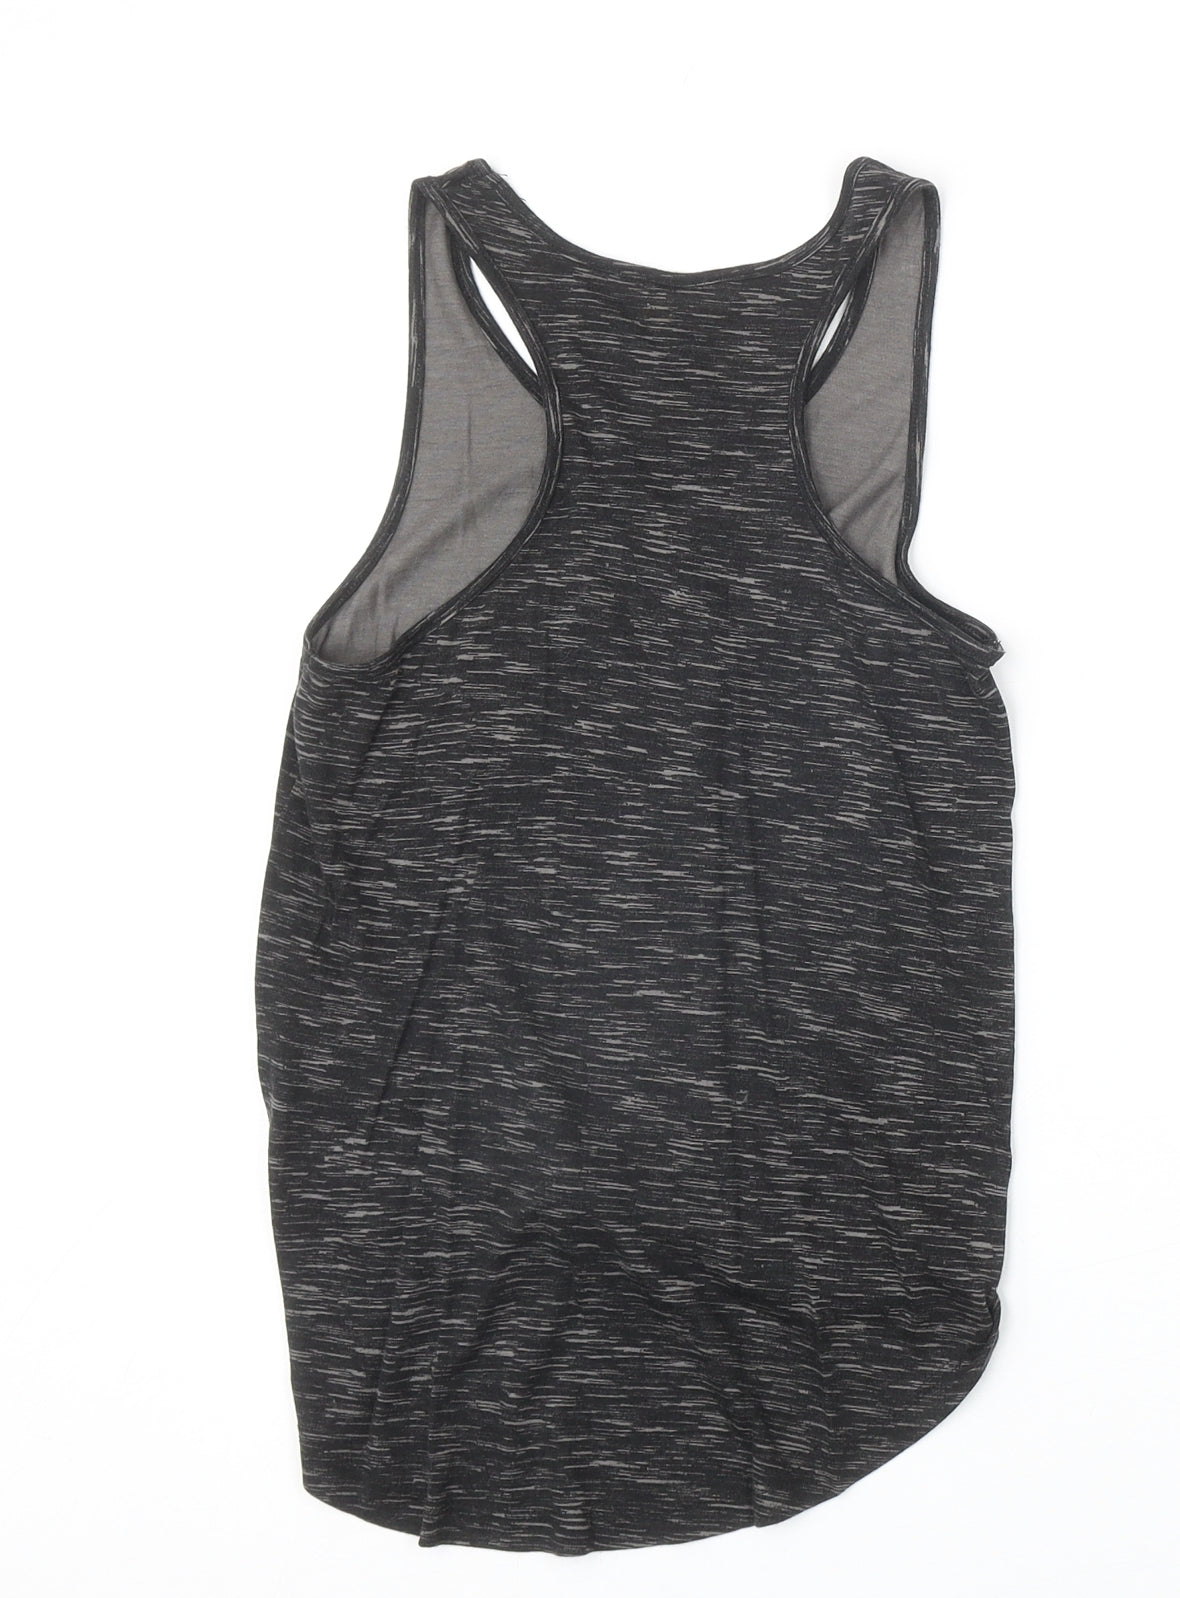 H&M Girls Black Cotton Basic Tank Size 8-9 Years Scoop Neck Pullover